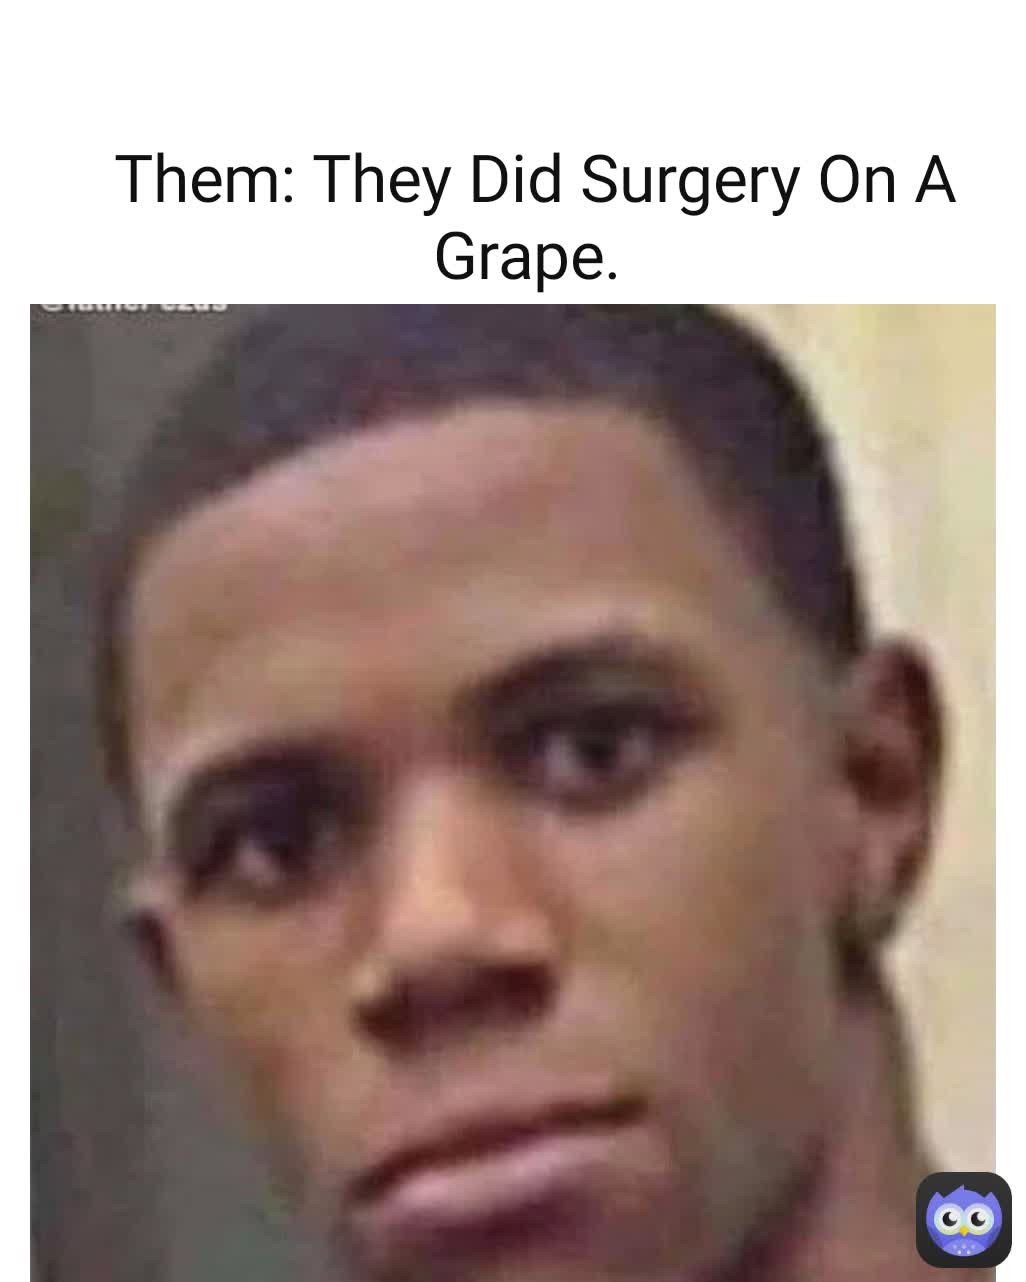 Them: They Did Surgery On A Grape. 

Me: